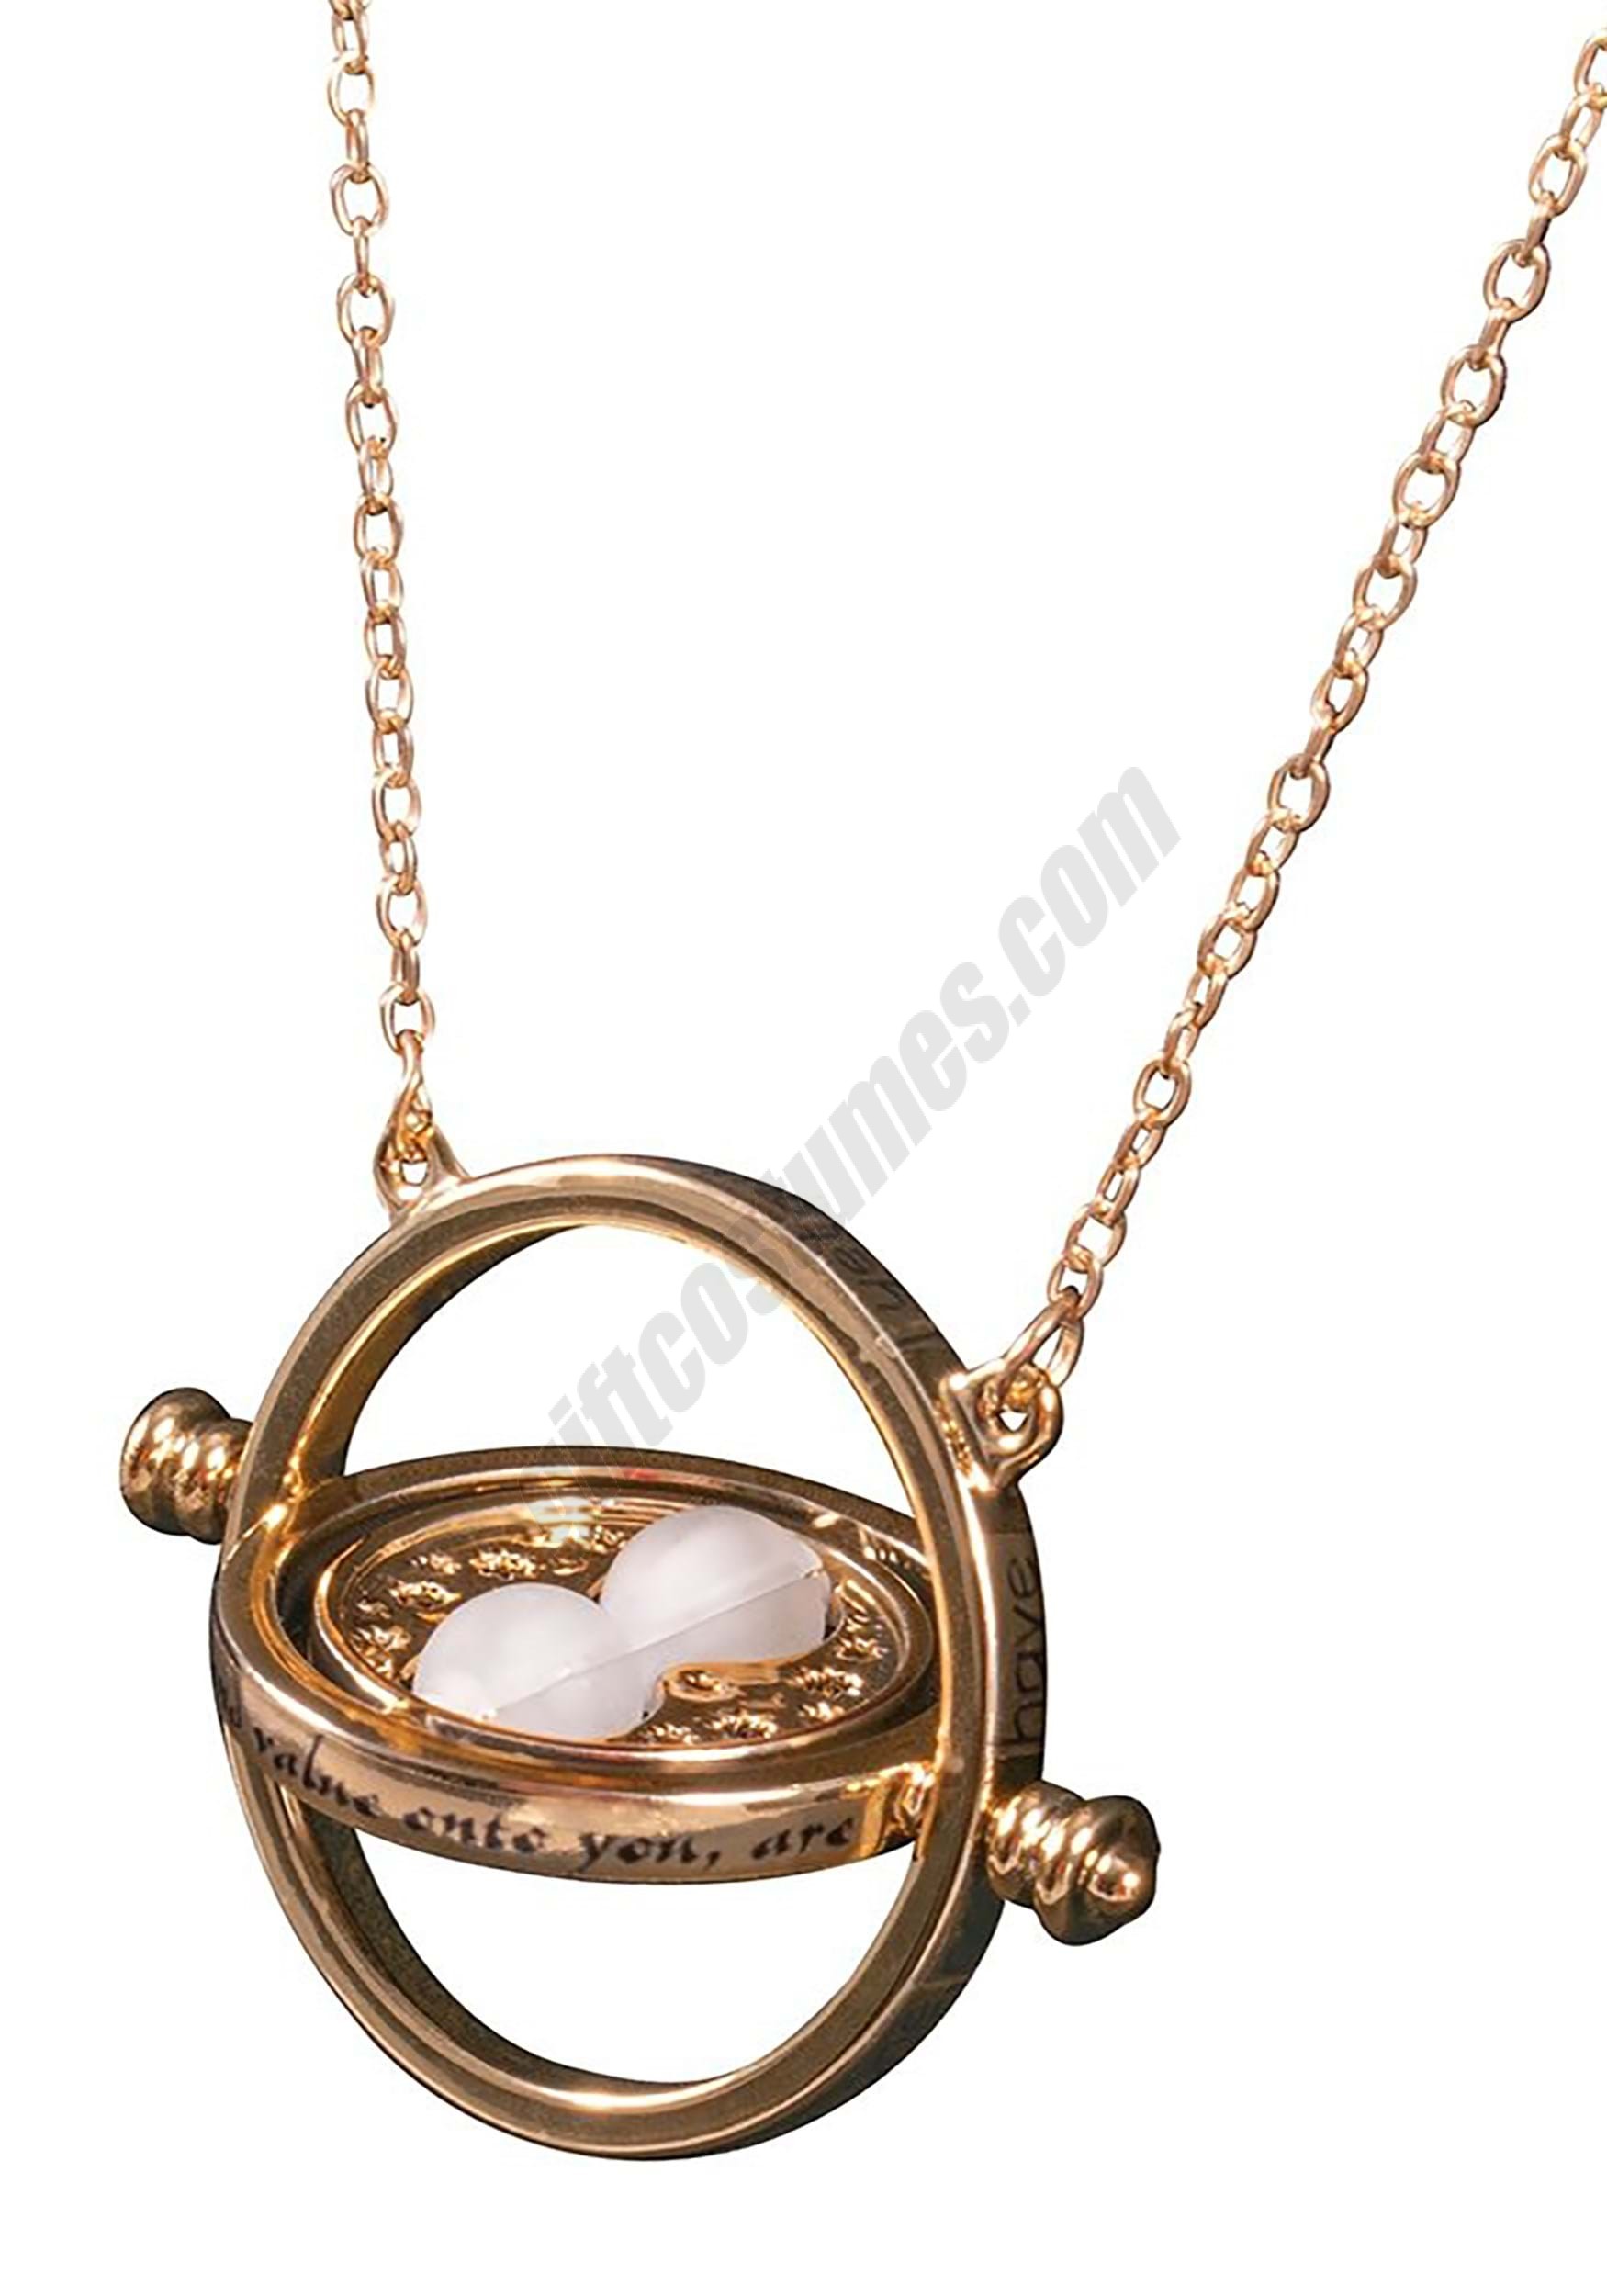 Time Turner Necklace Hermione Accessory Promotions - Time Turner Necklace Hermione Accessory Promotions